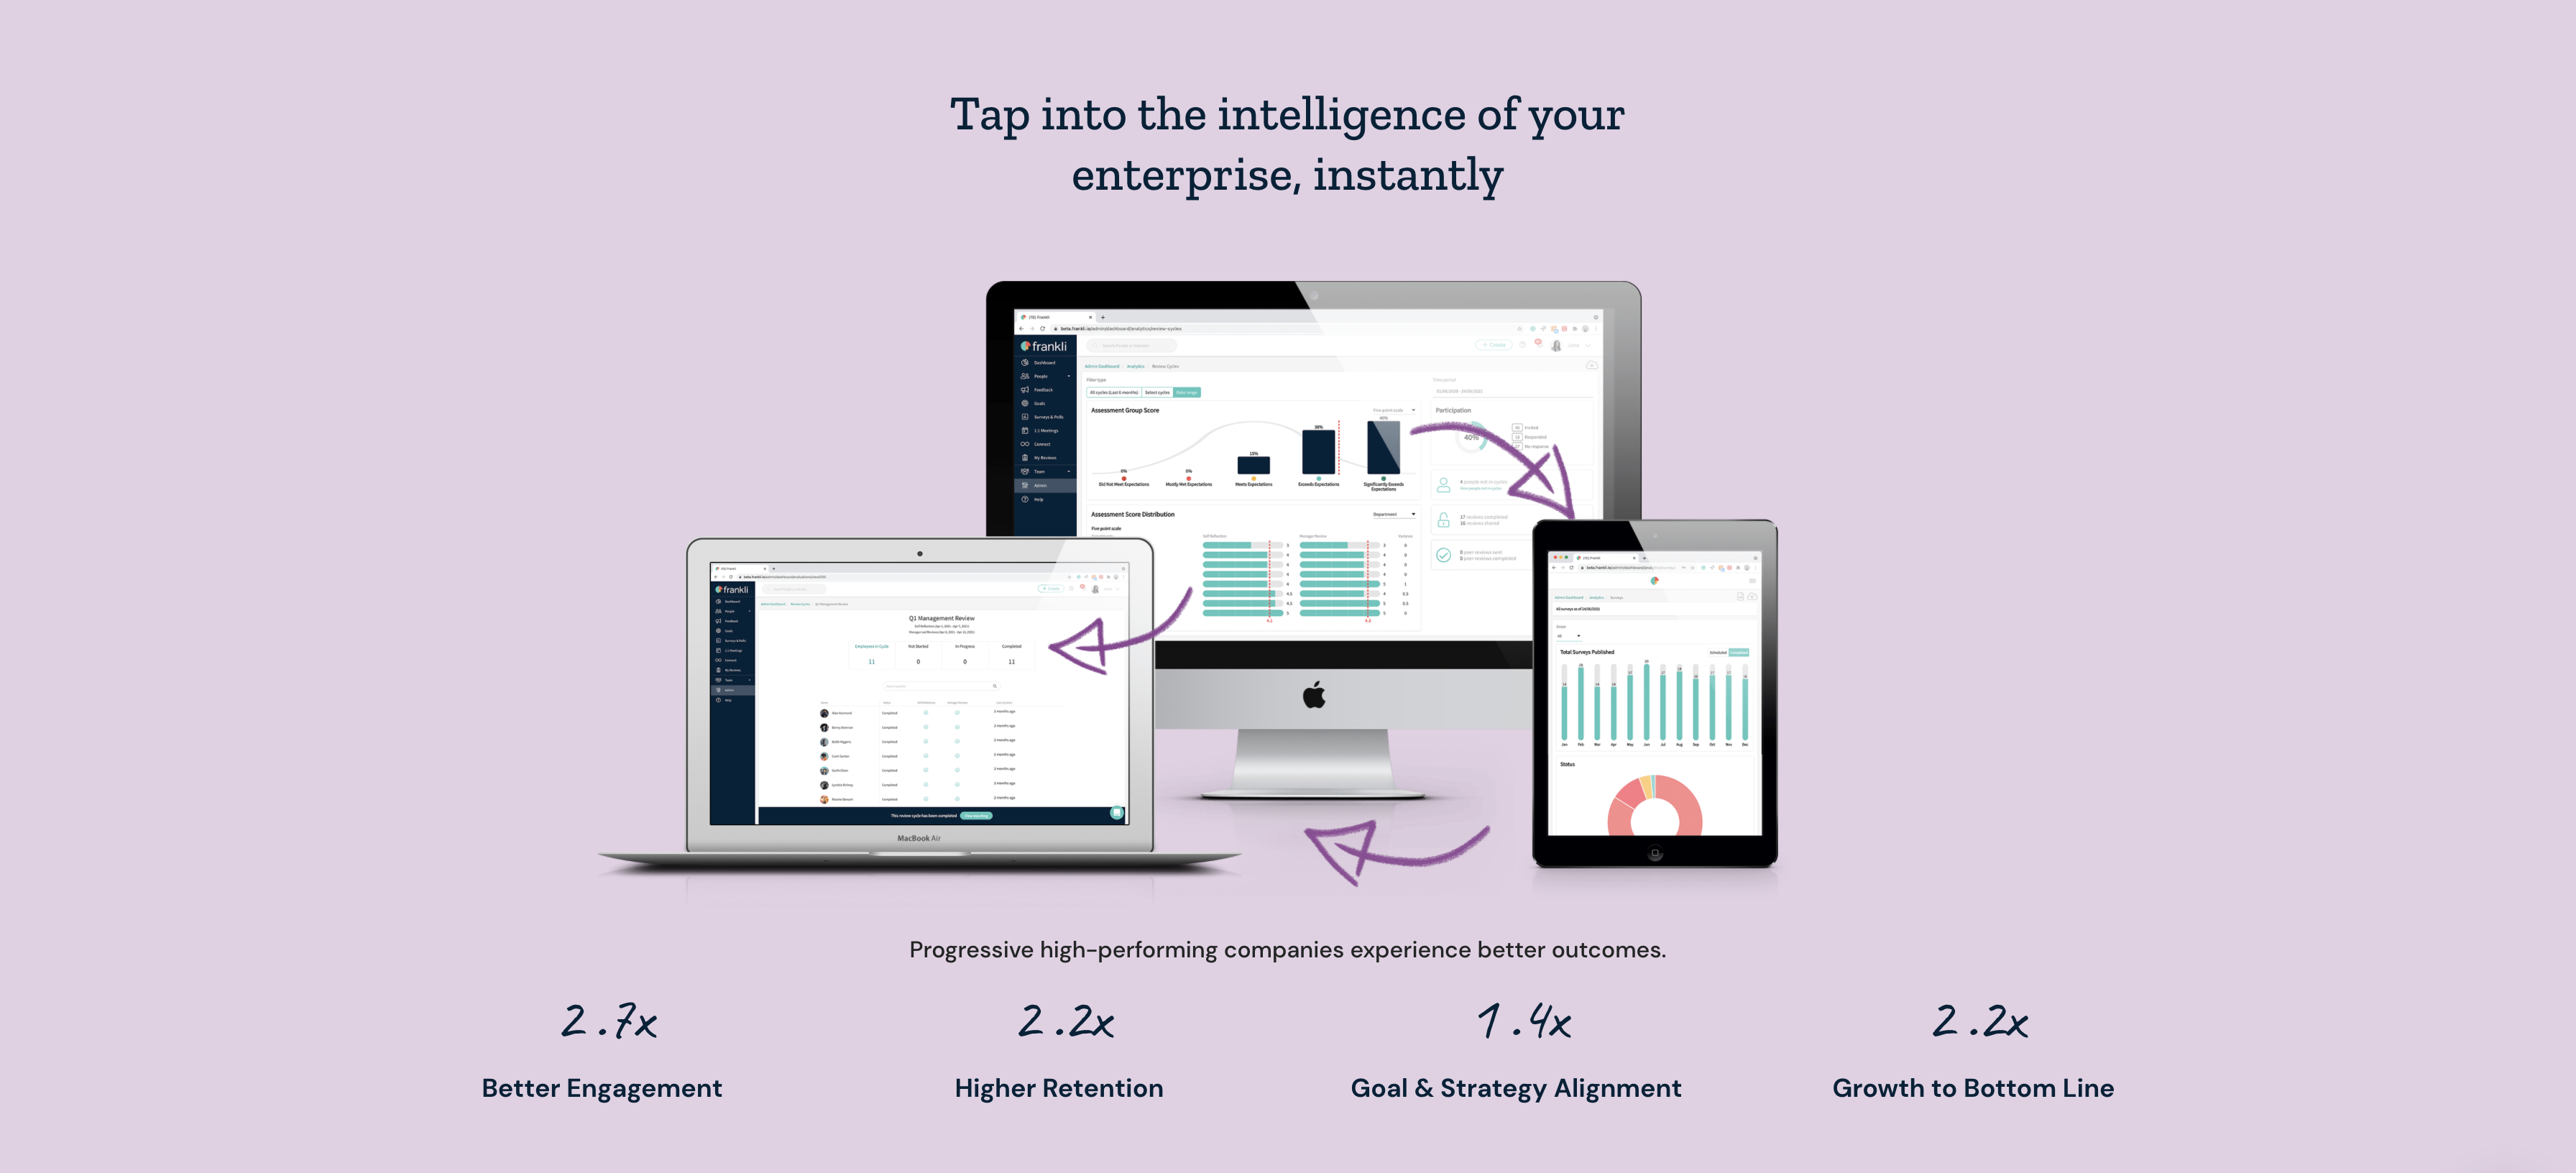 Tap into the intelligence of your enterprise, instantly